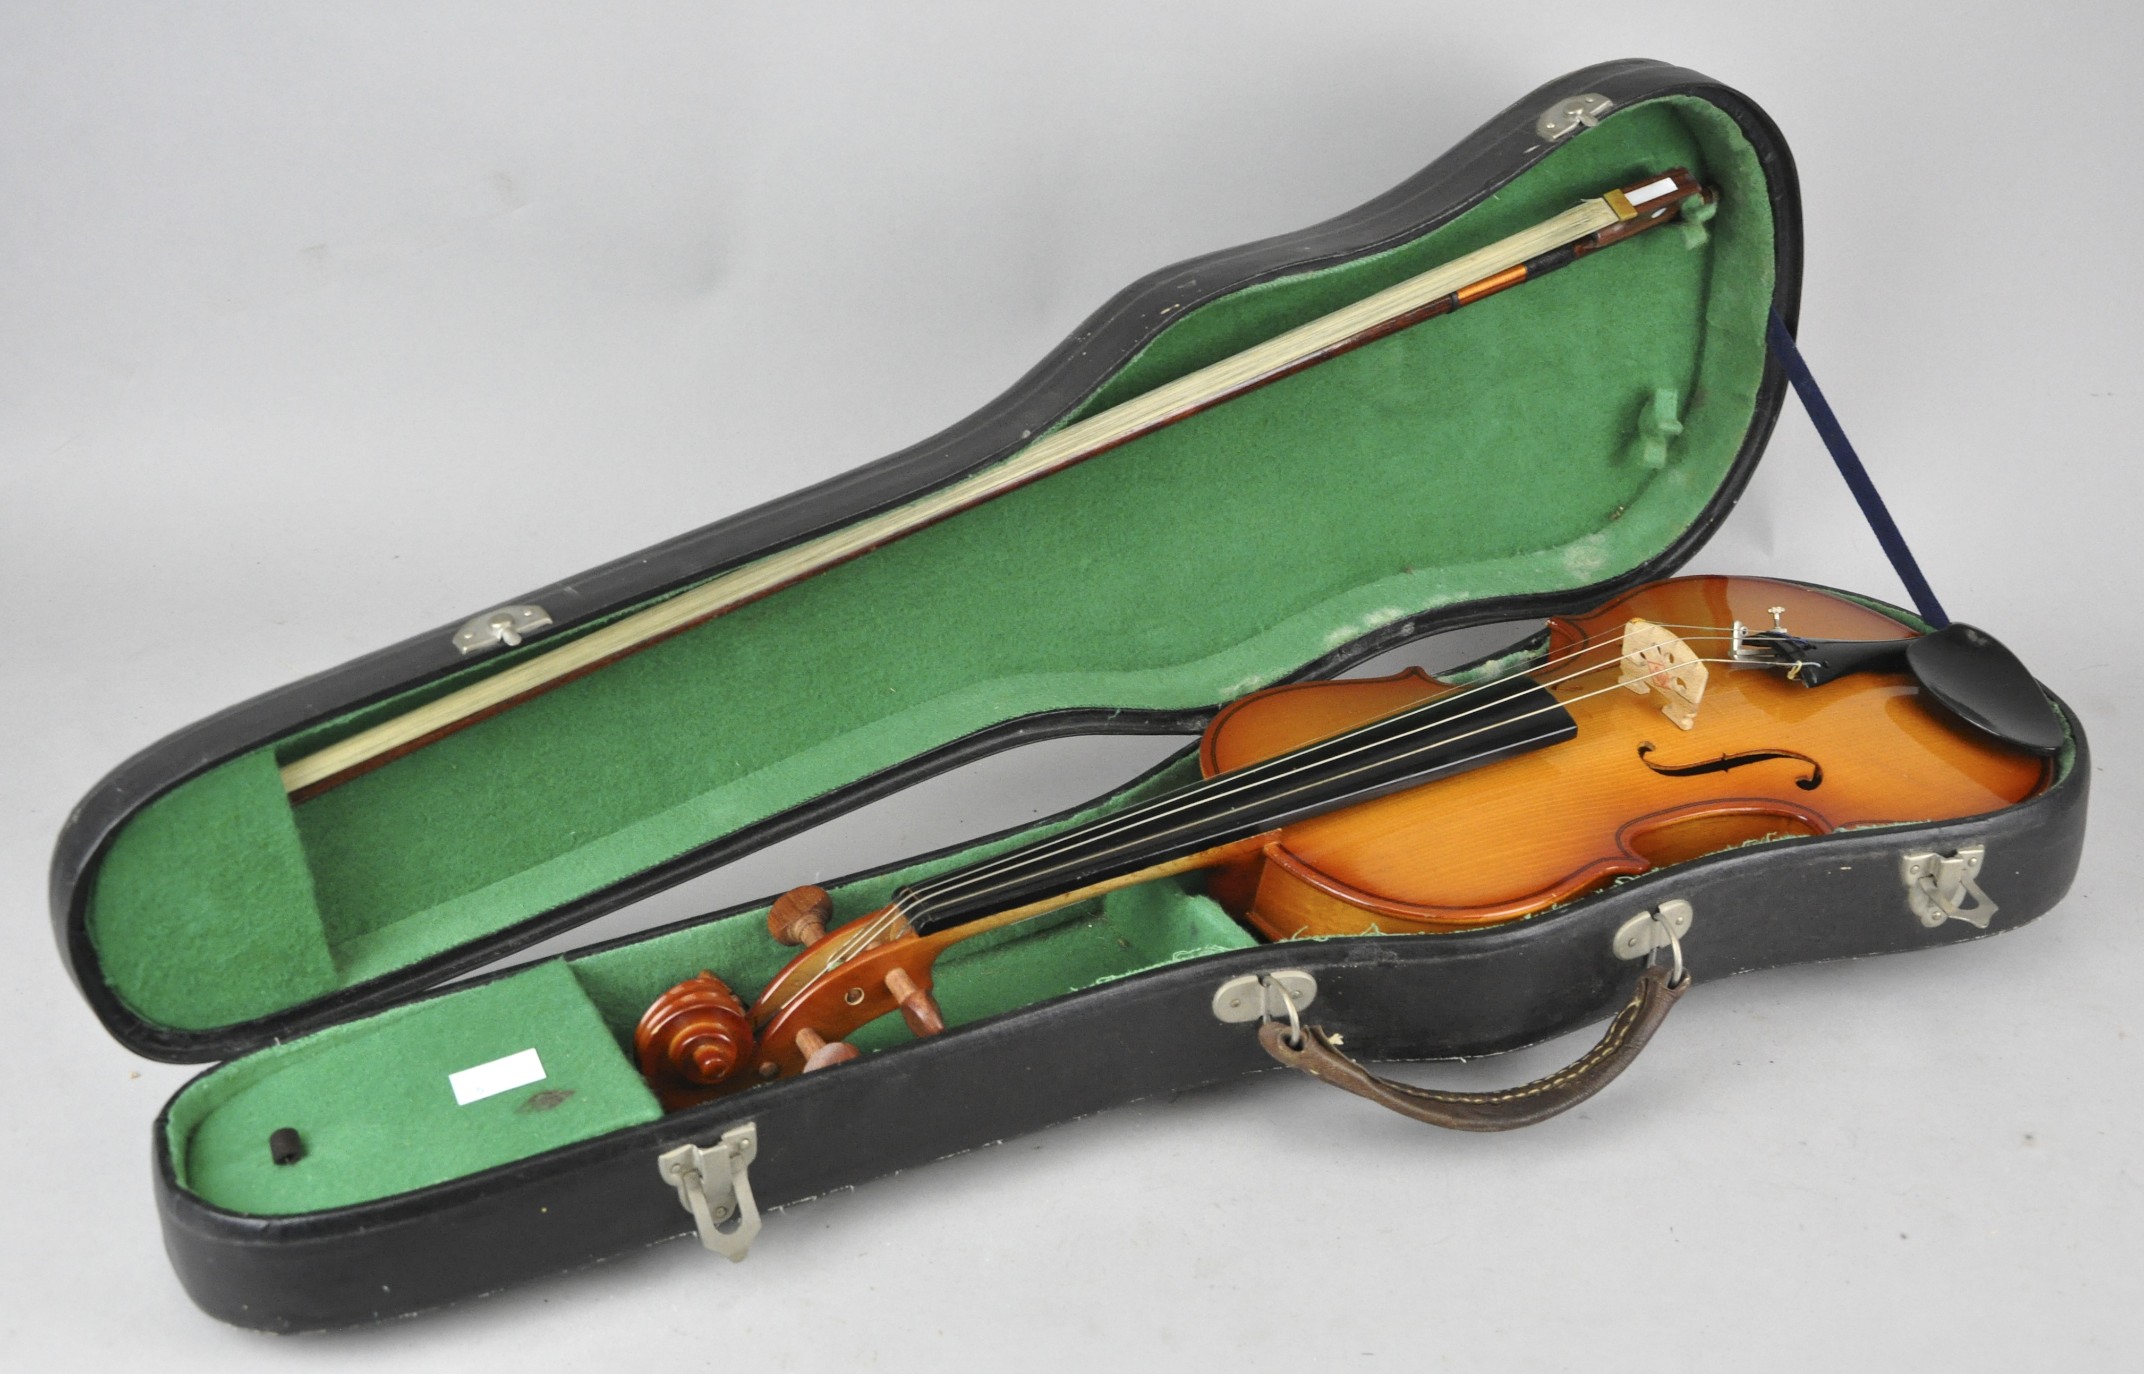 A Chinese Parrot brand child's size violin, with paper label to the inside, and bow,